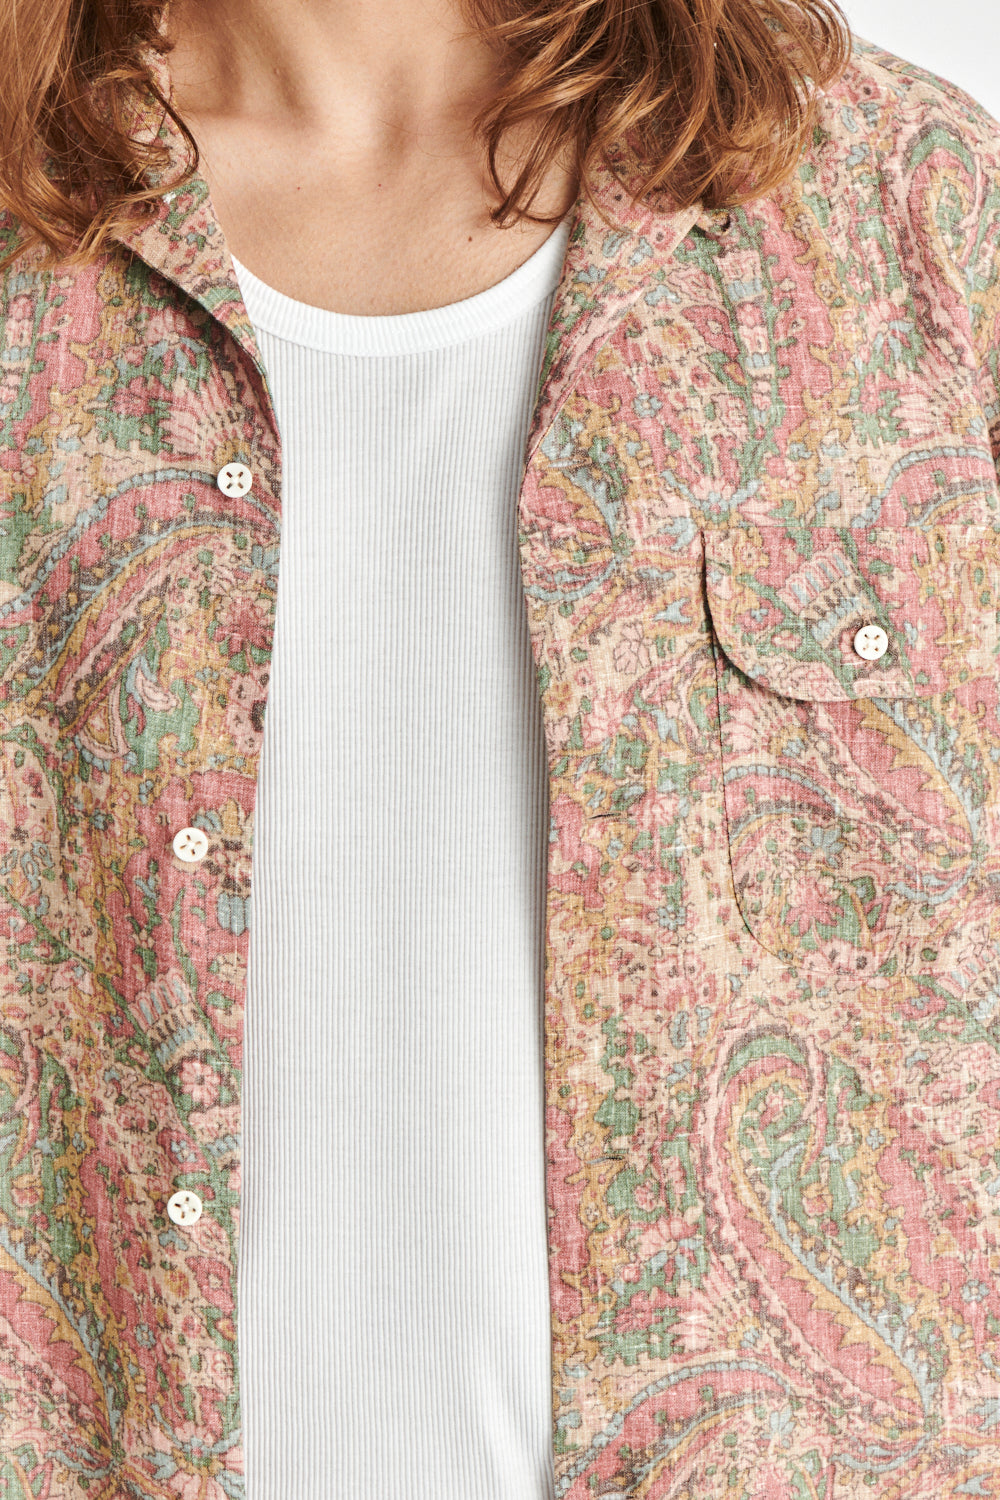 Short Sleeve Relaxed Camp Collar Shirt in a Pink, Green and Beige Shaded Paisley Design Japanese Linen